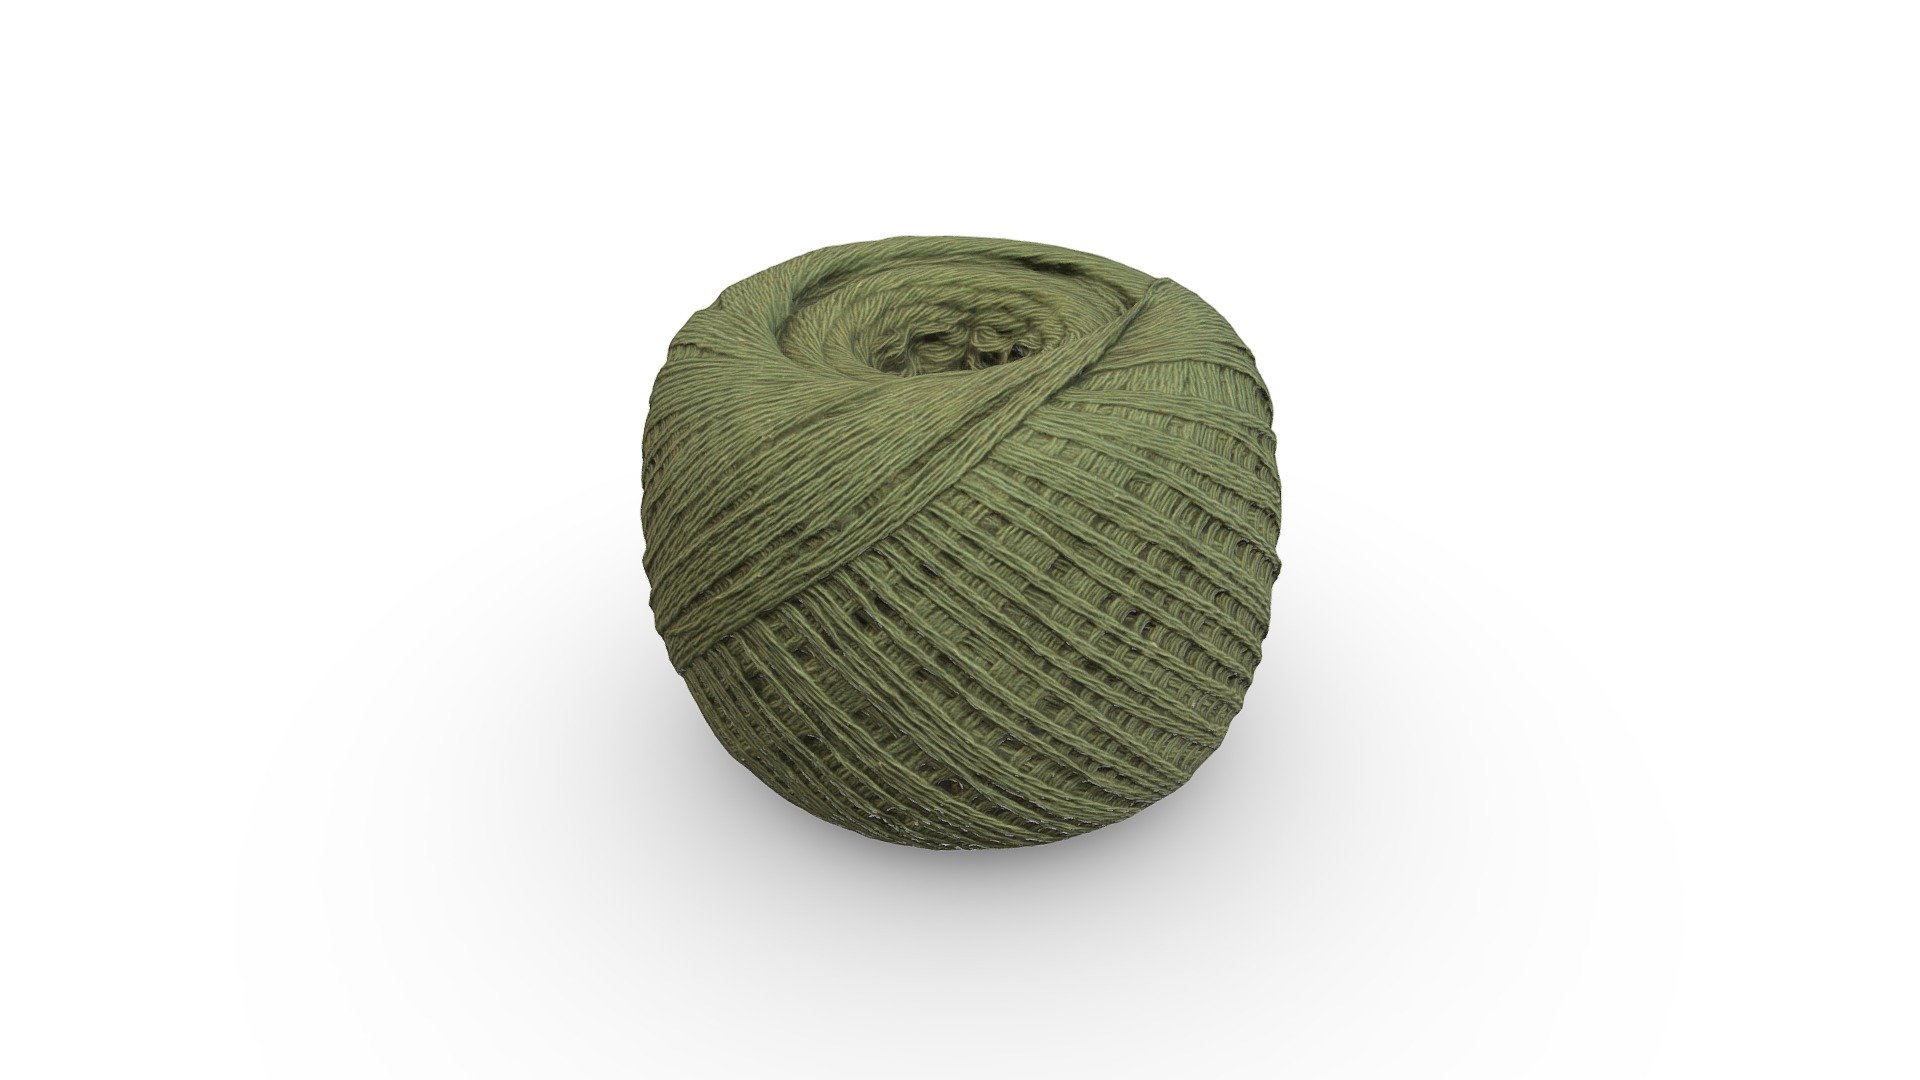 High-poly green ball of thread photogrammetry scan. PBR texture maps 4096x4096 px. resolution for metallic or specular workflow. Scan from real threads, high-poly 3D model, 4K resolution textures.

Additional file contains low-poly 3d model version, game-ready in real time 3d model